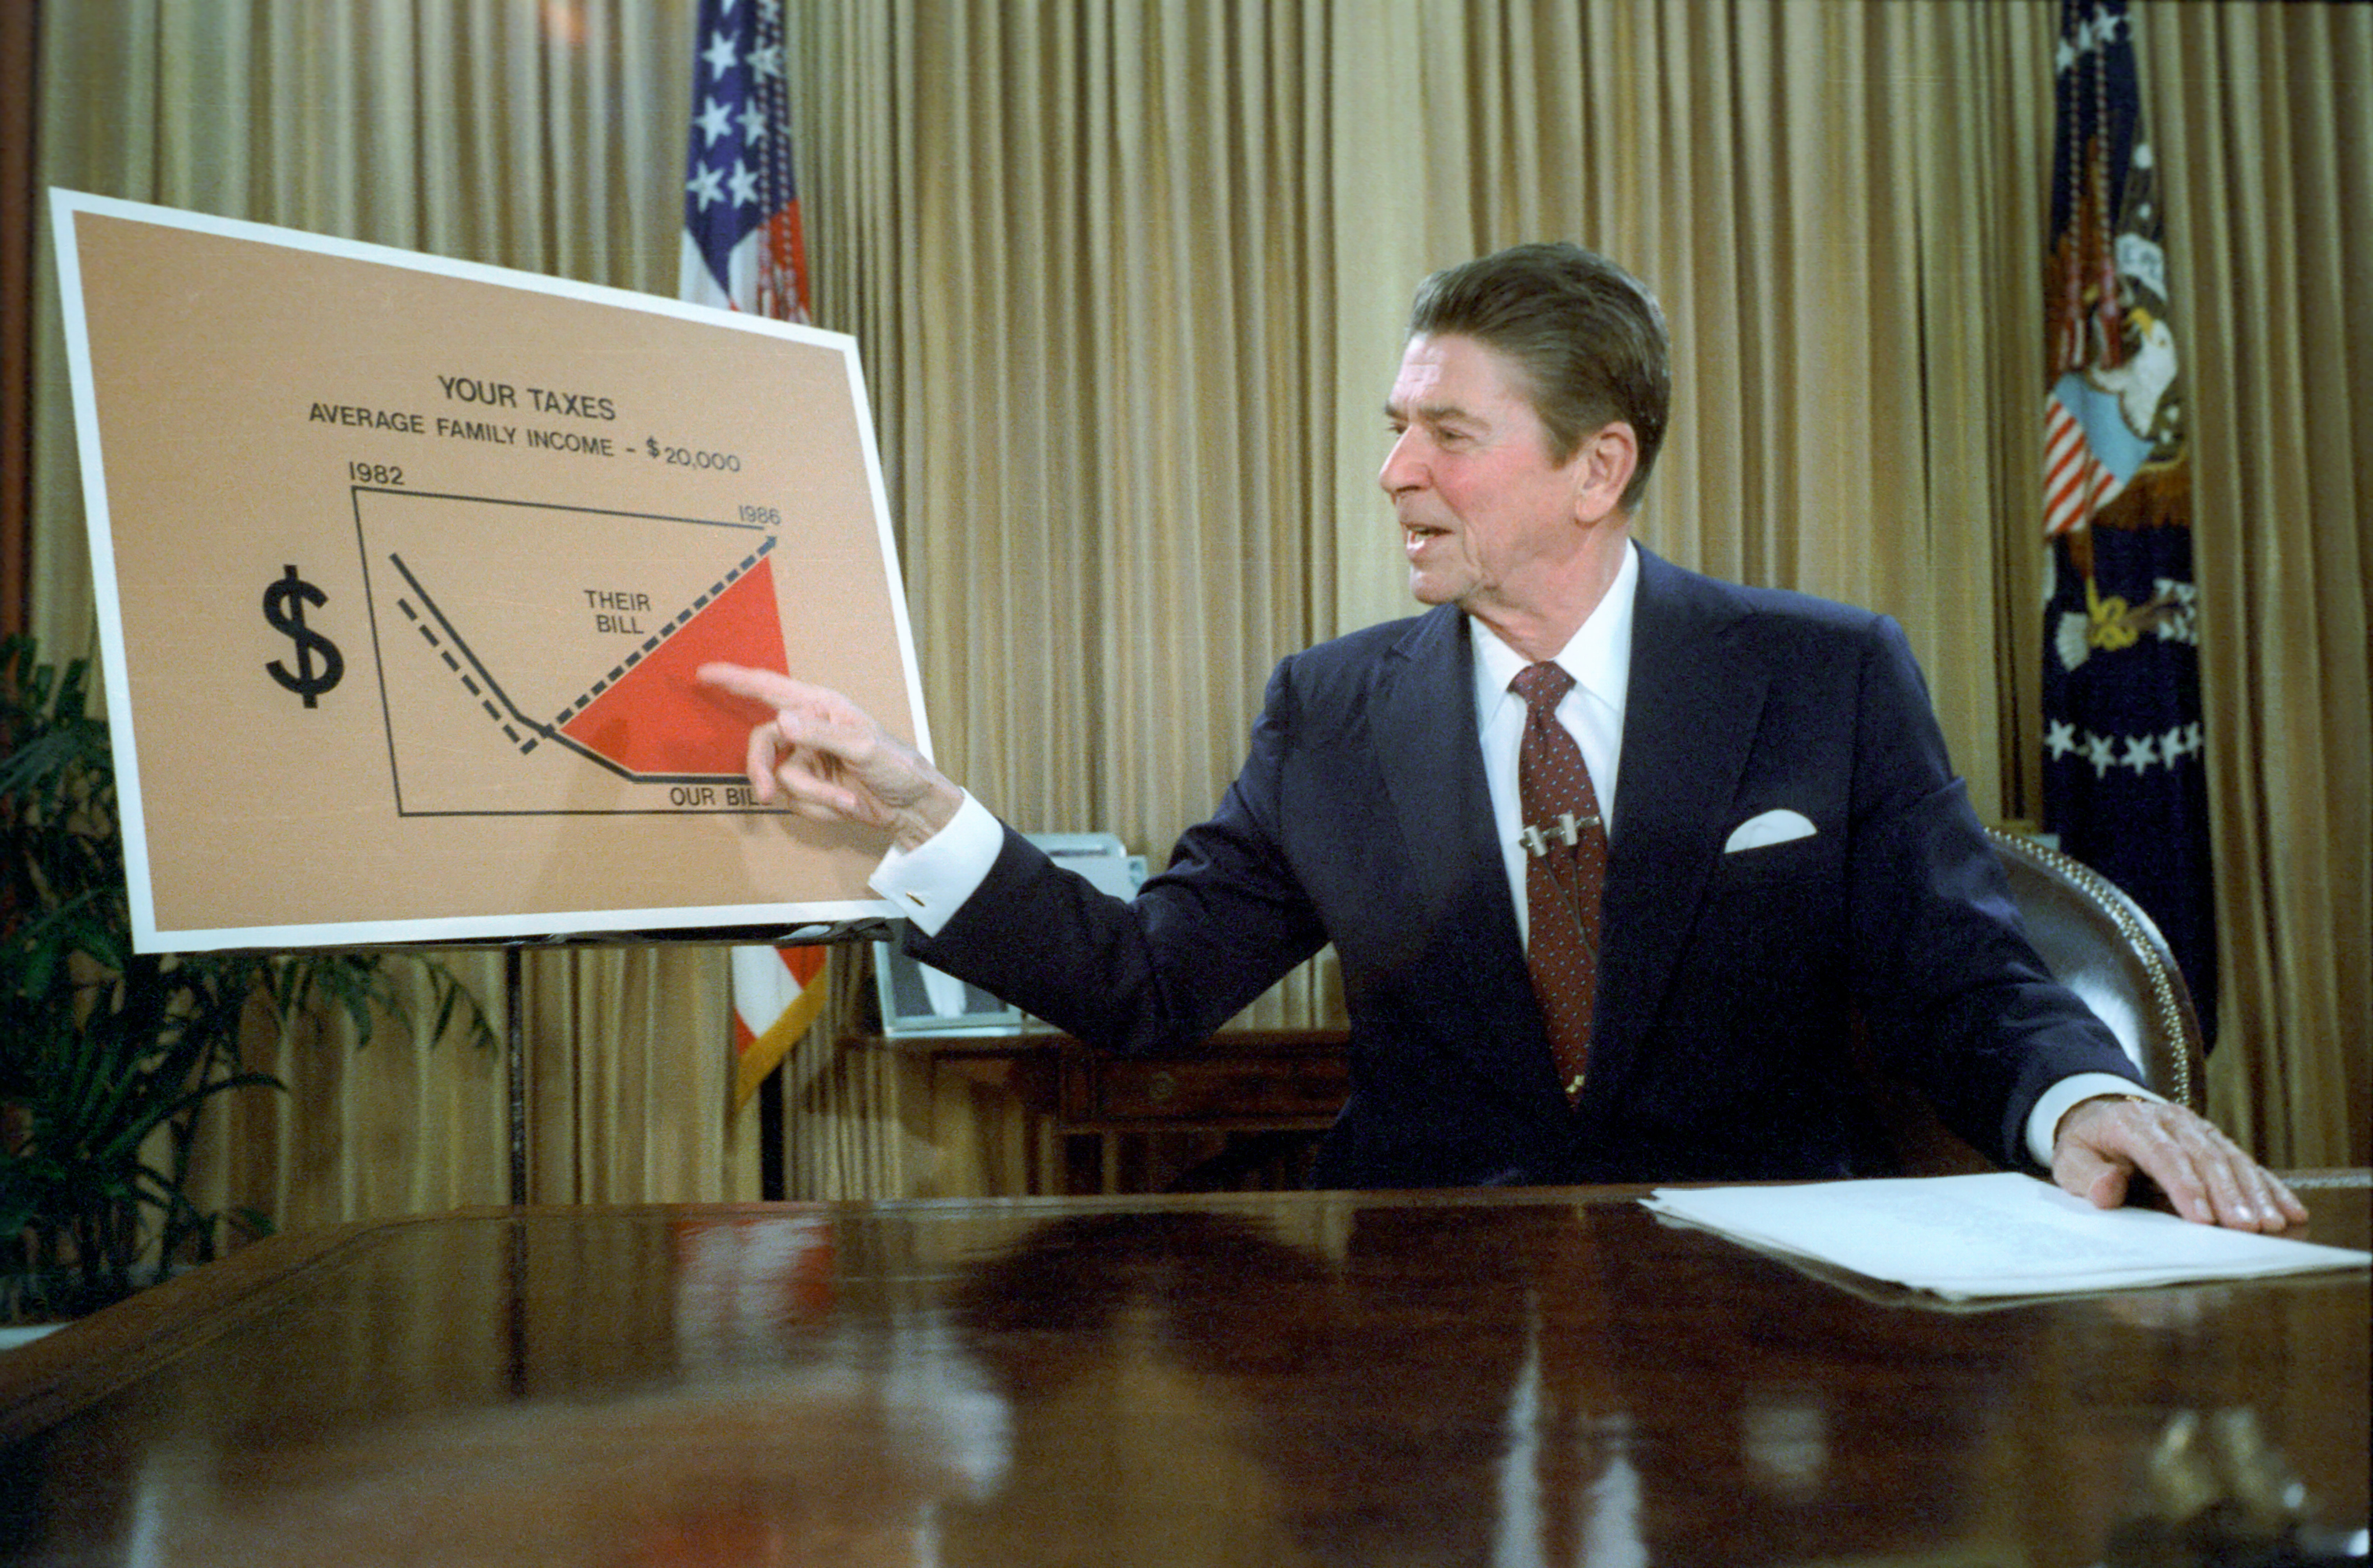 Reagan used the chart that Steve drew for him during a televised address asking Americans to call their members of Congress and demand they index the tax code. People did. And it worked. President Ronald Reagan tax legislation index to inflation